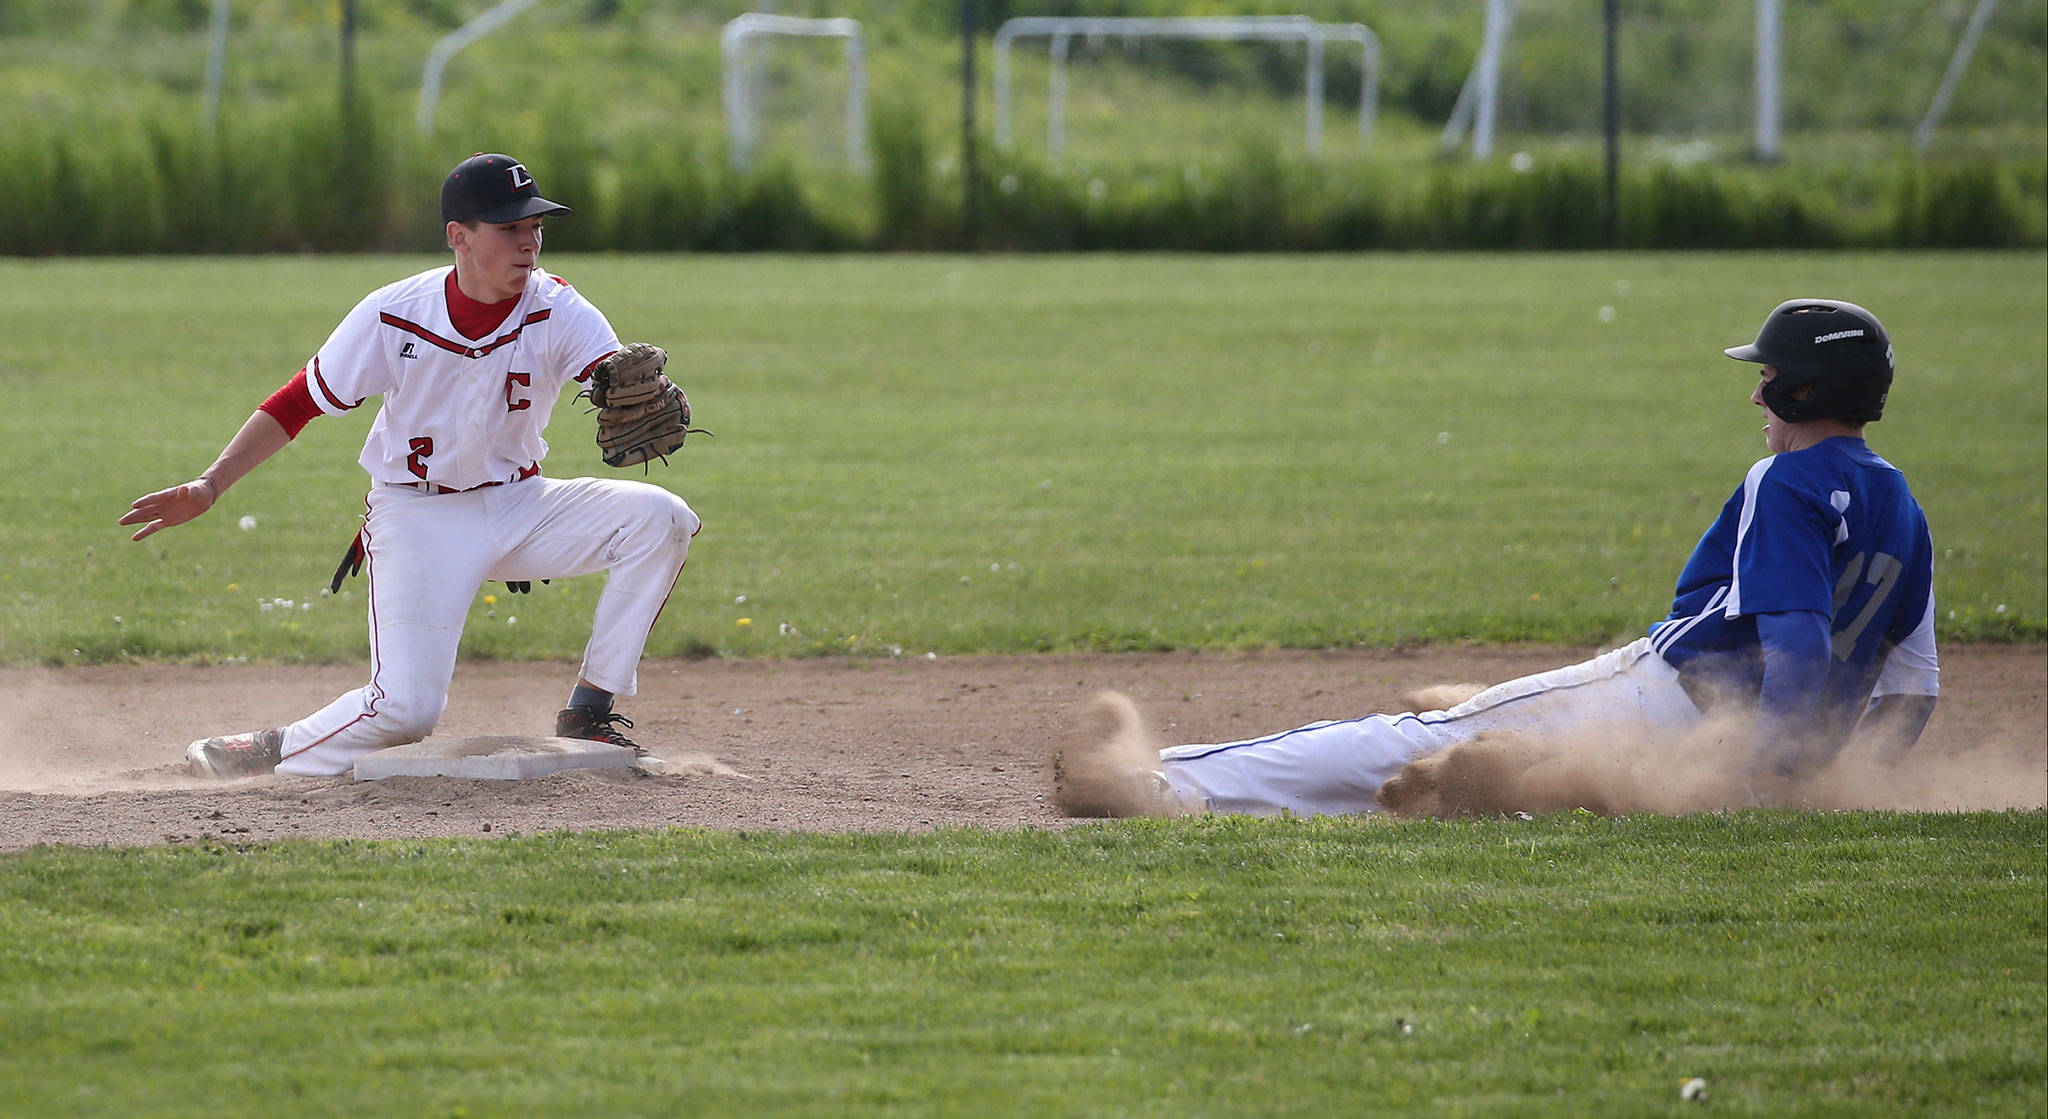 Nick Etzell attempts to take out BC’s Jeff Jewett on a stolen base. (Photo by John Fisken)